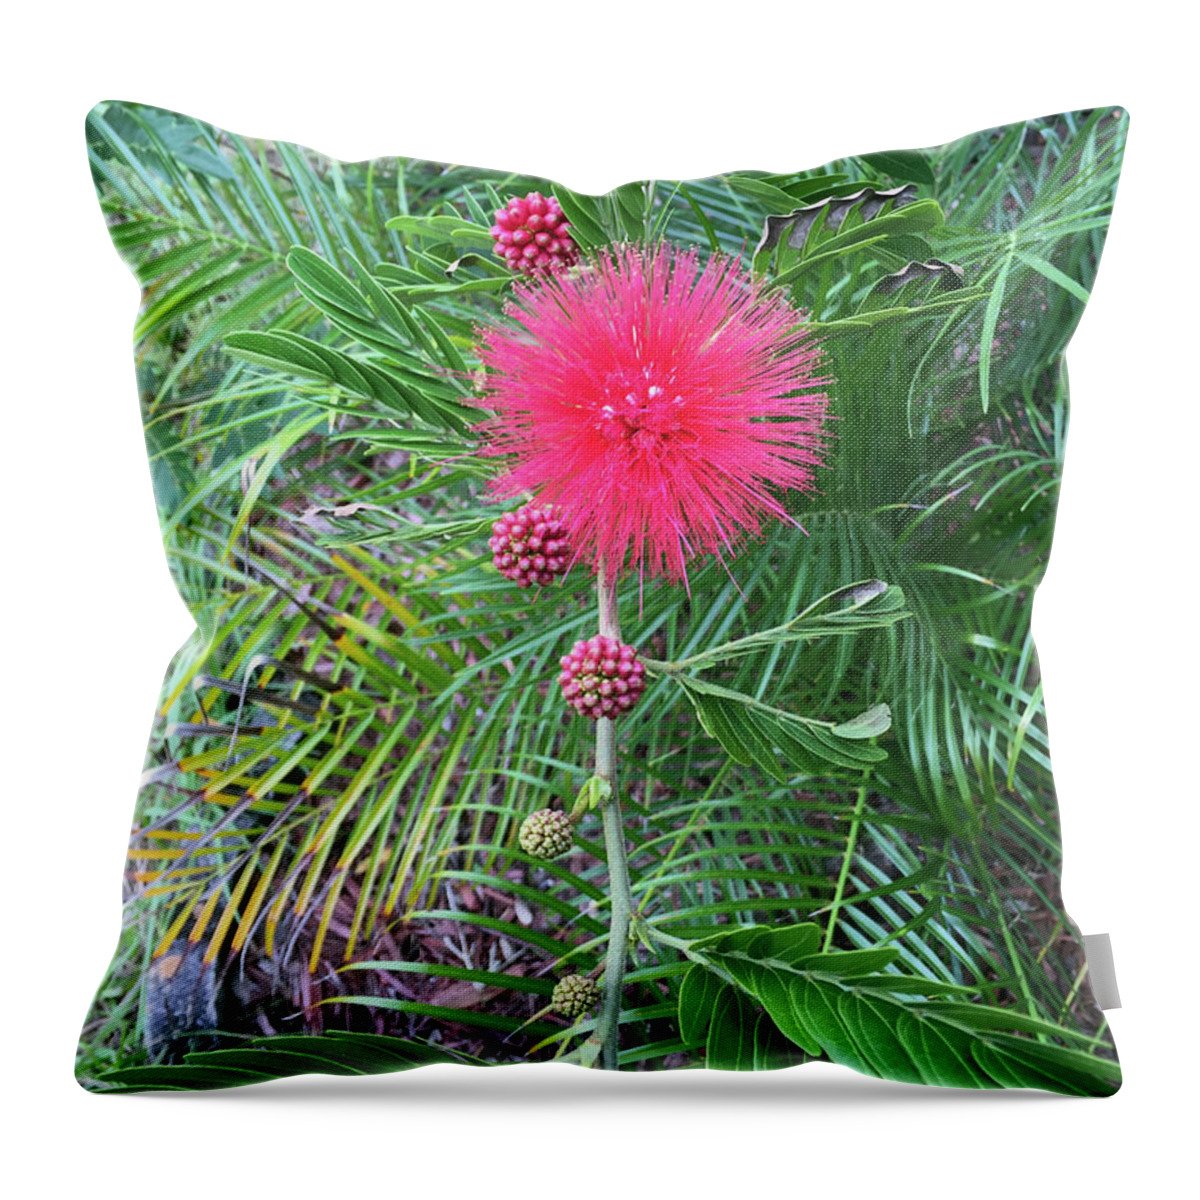 Powderpuff Throw Pillow featuring the photograph Vertical Powderpuff by Aimee L Maher ALM GALLERY